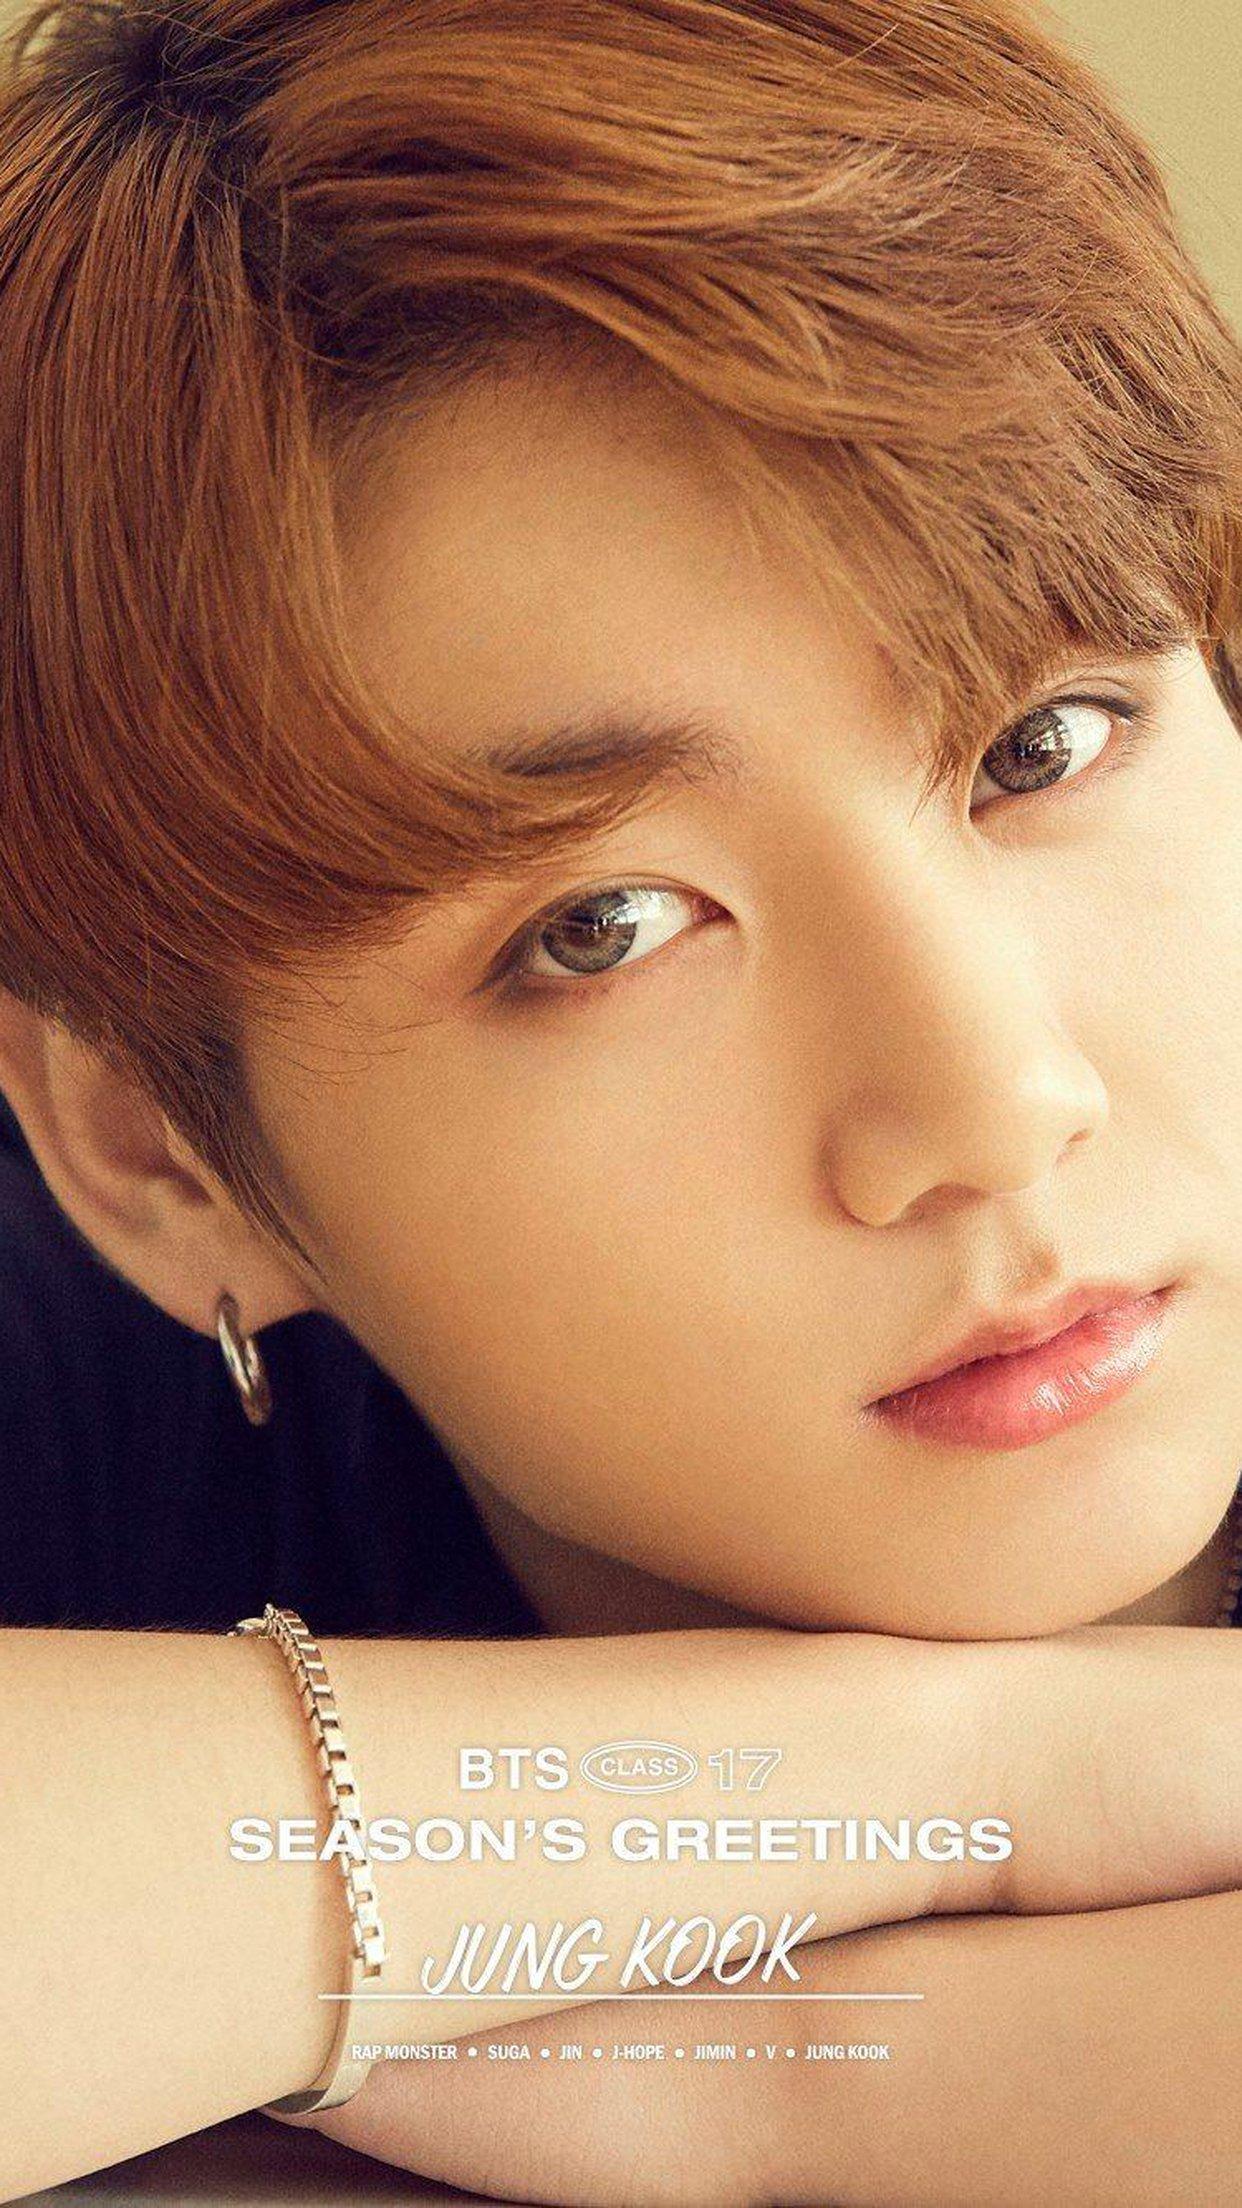 Download BTS Jungkook Abs Kpop for iPhone 8 Plus, iPhone 6s Plus